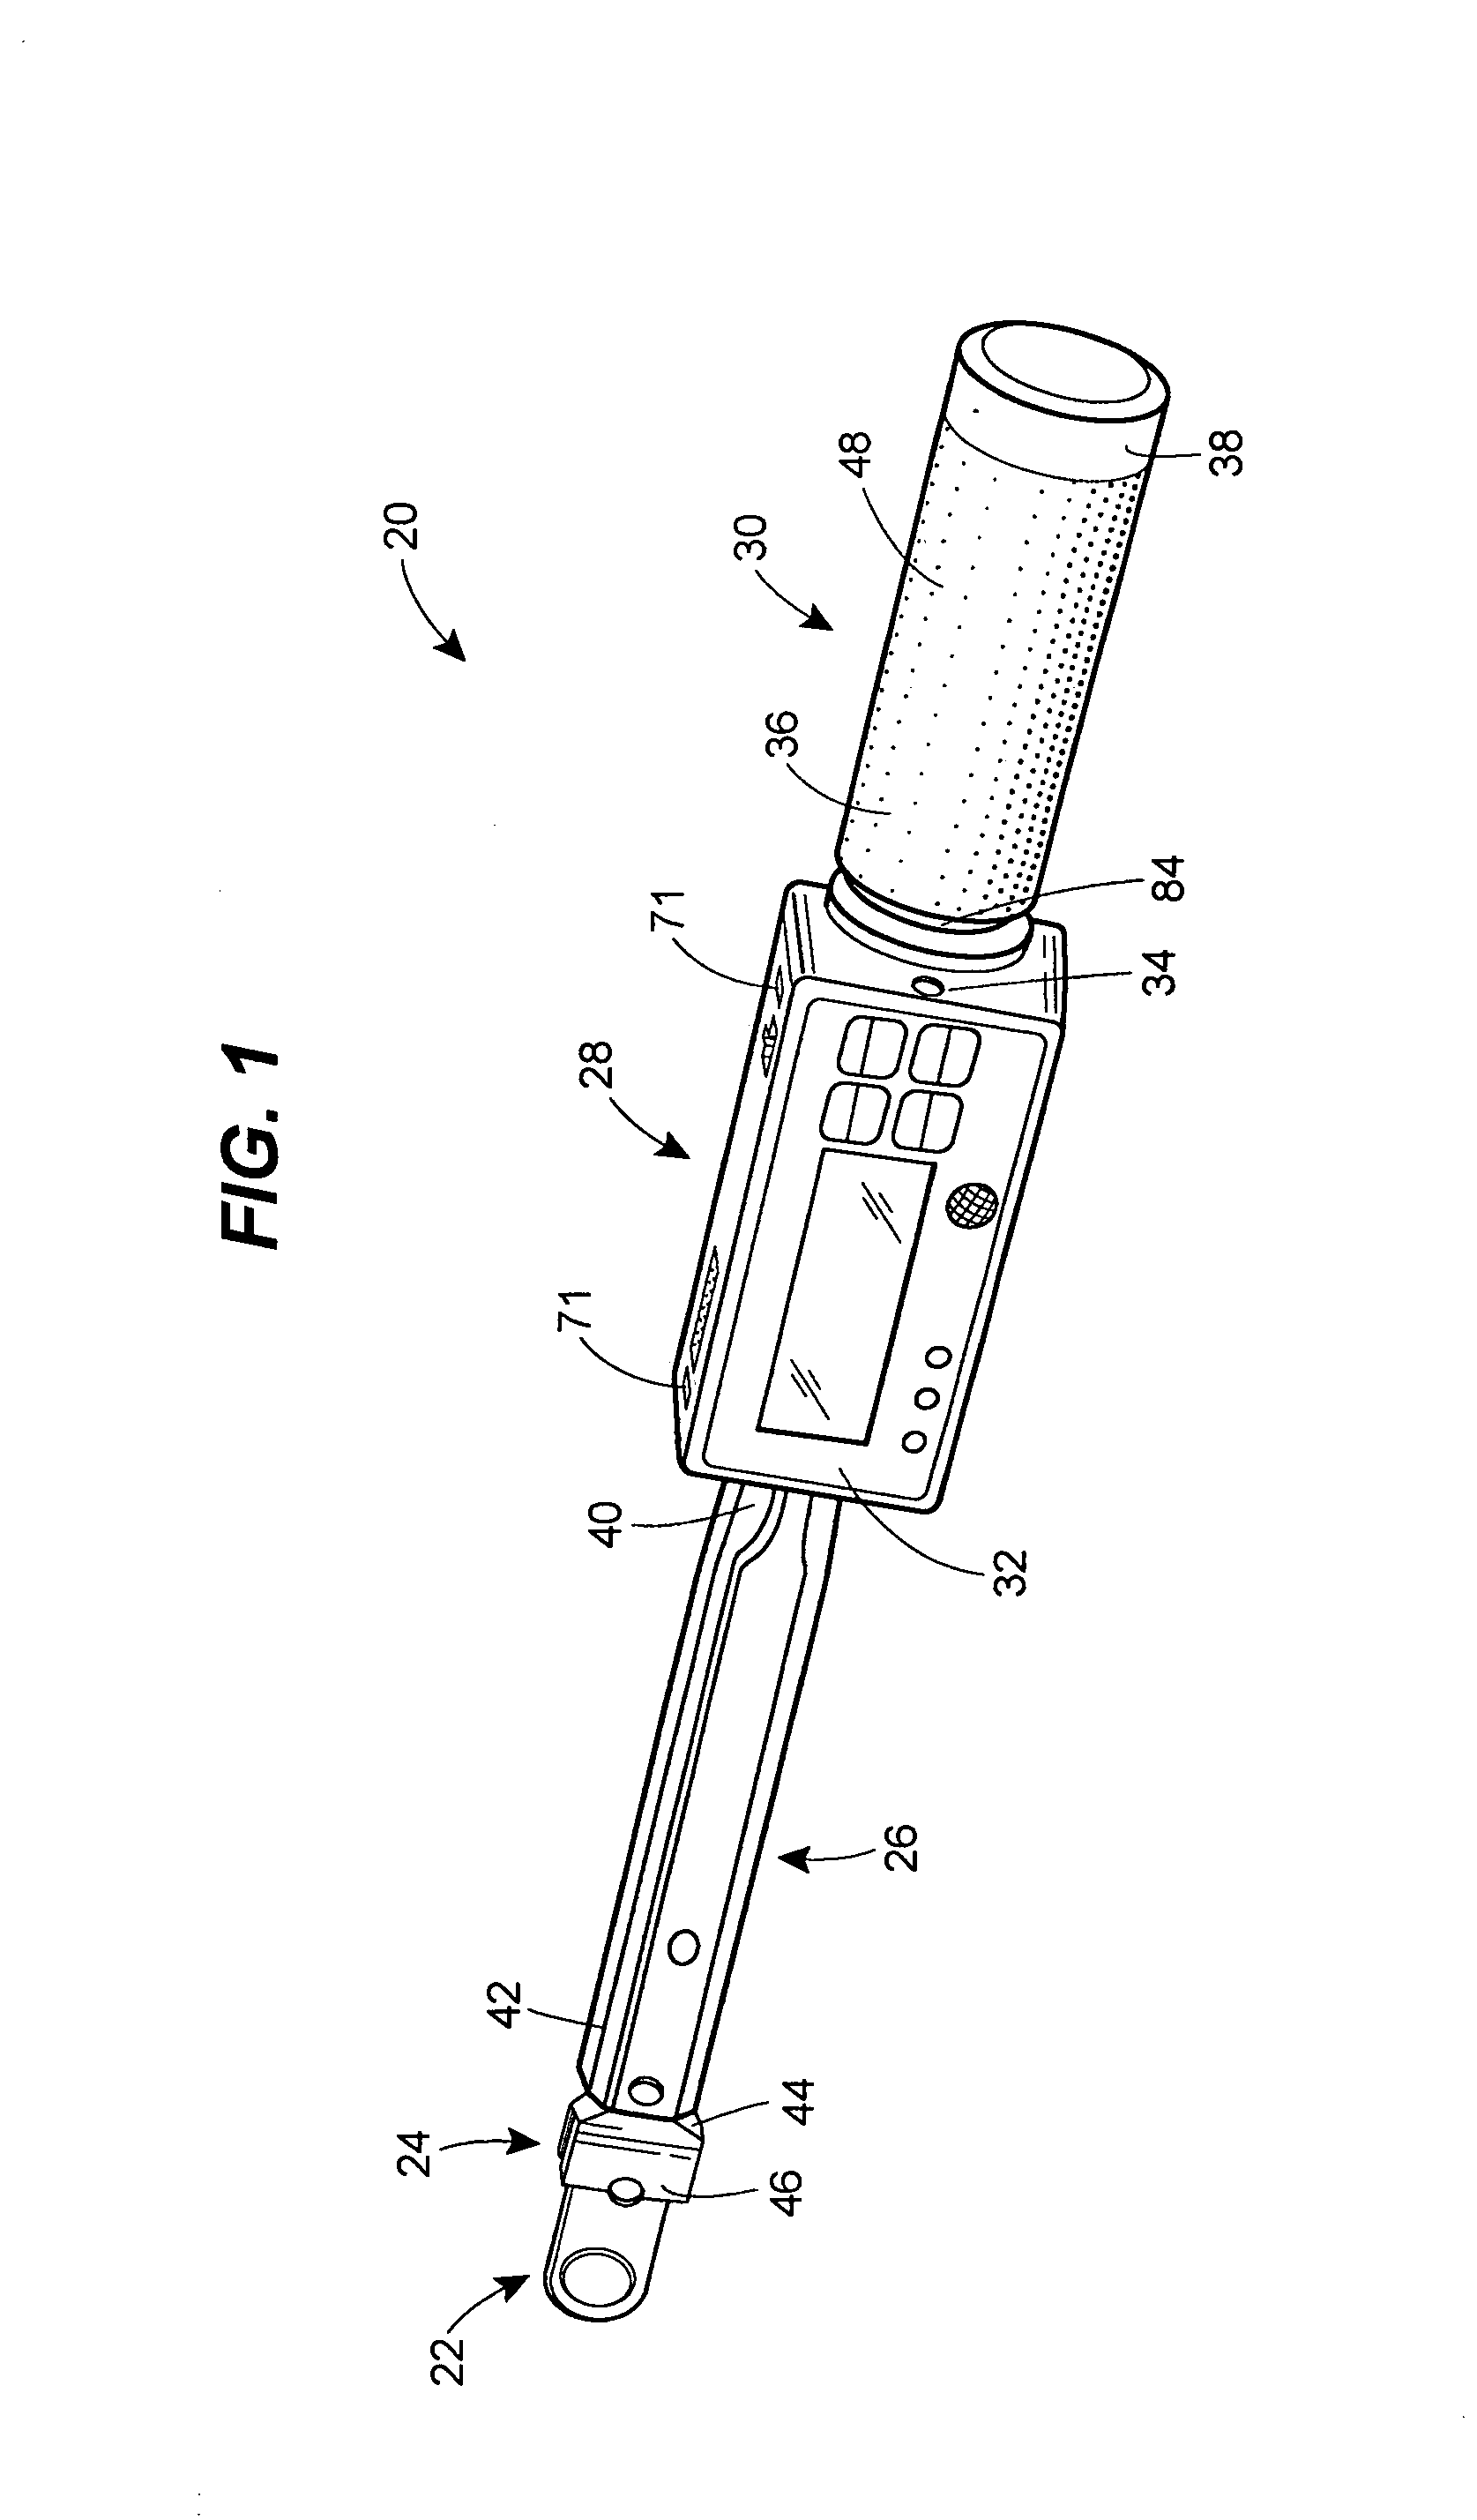 Torque wrench with torque range indicator and system and method employing the same